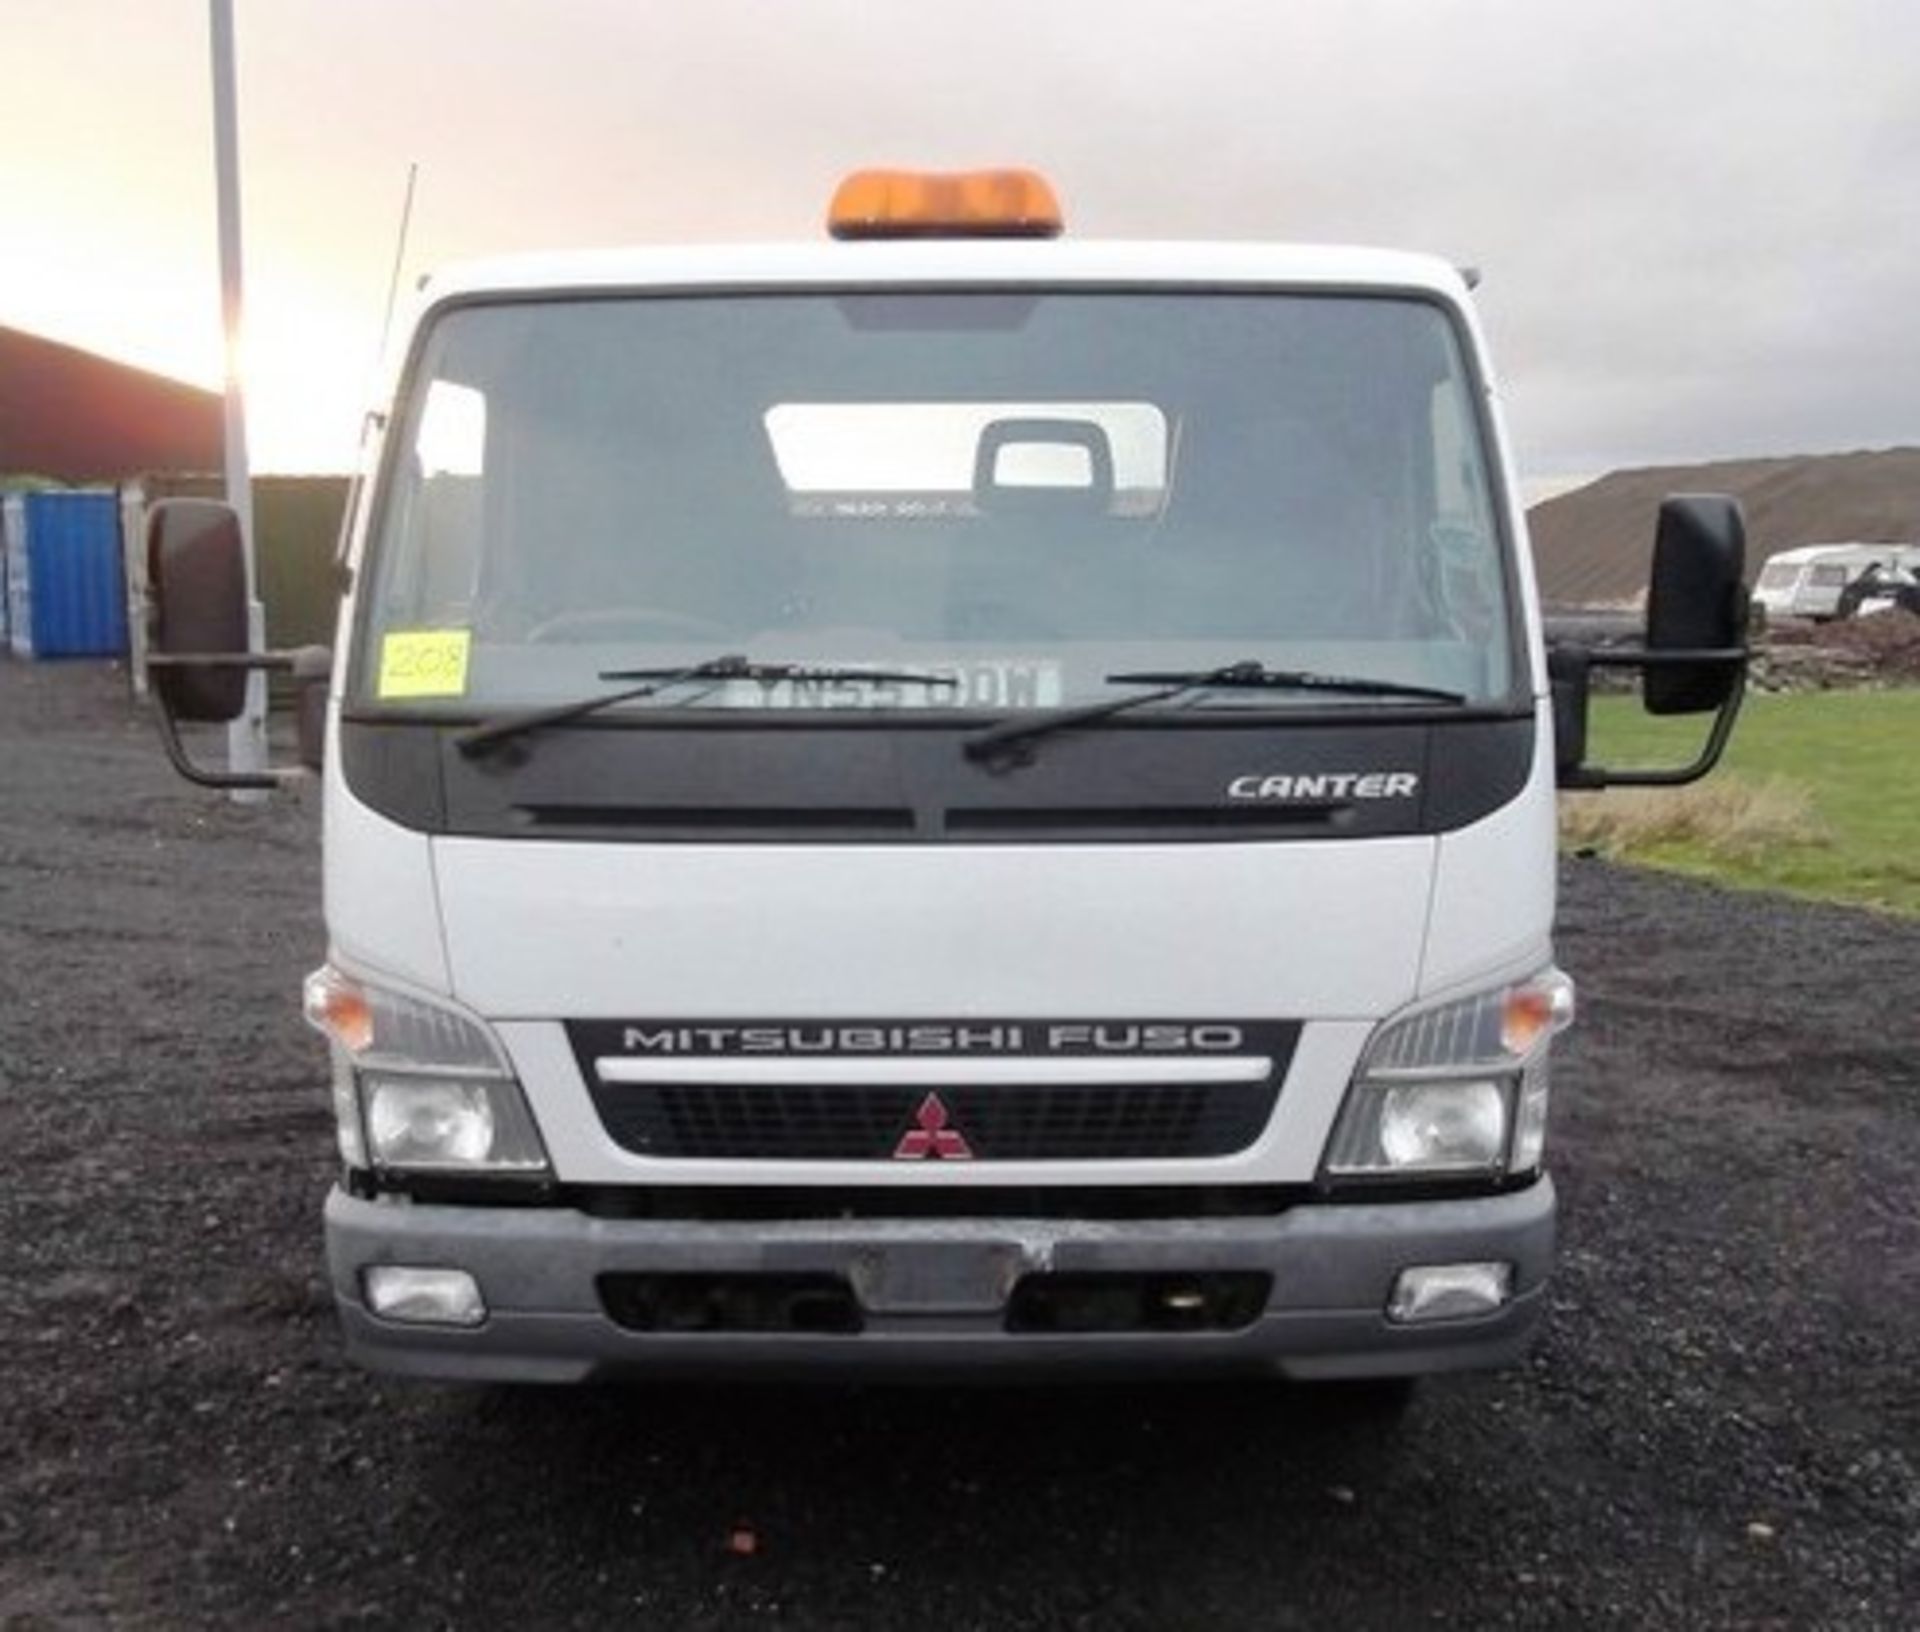 MITSUBISHI CANTER 75 7C14 - 3908cc
Body: 2 Dr Truck
Color: White
First Reg: 01/09/2005
Doors: 2
MOT: - Image 5 of 16